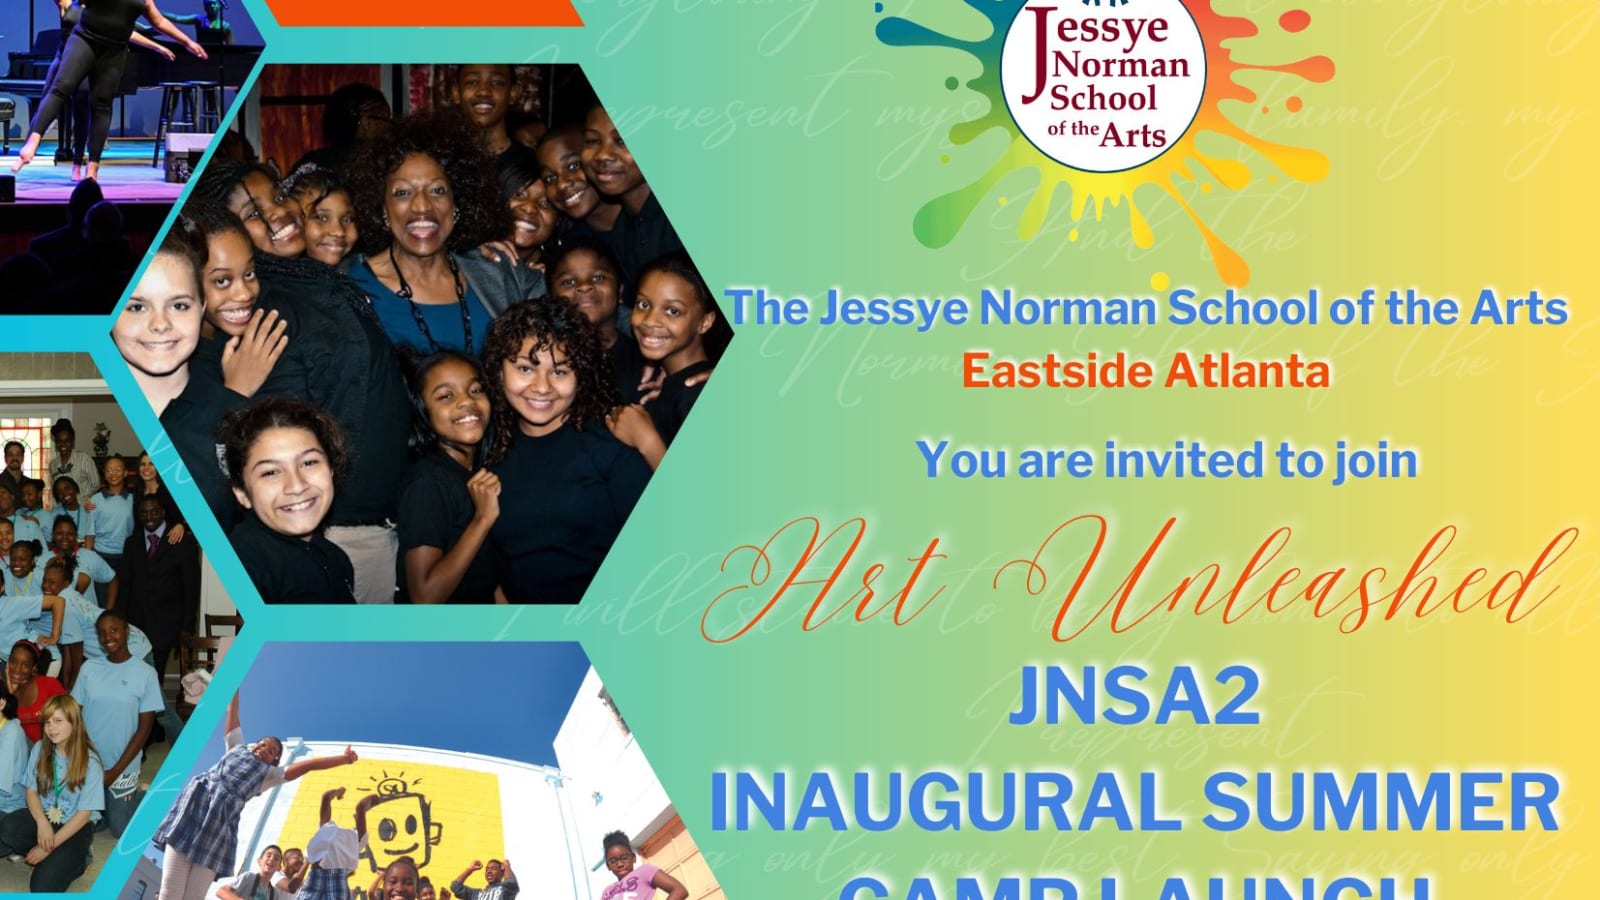 Jessye Norman School of the Arts Launch Party